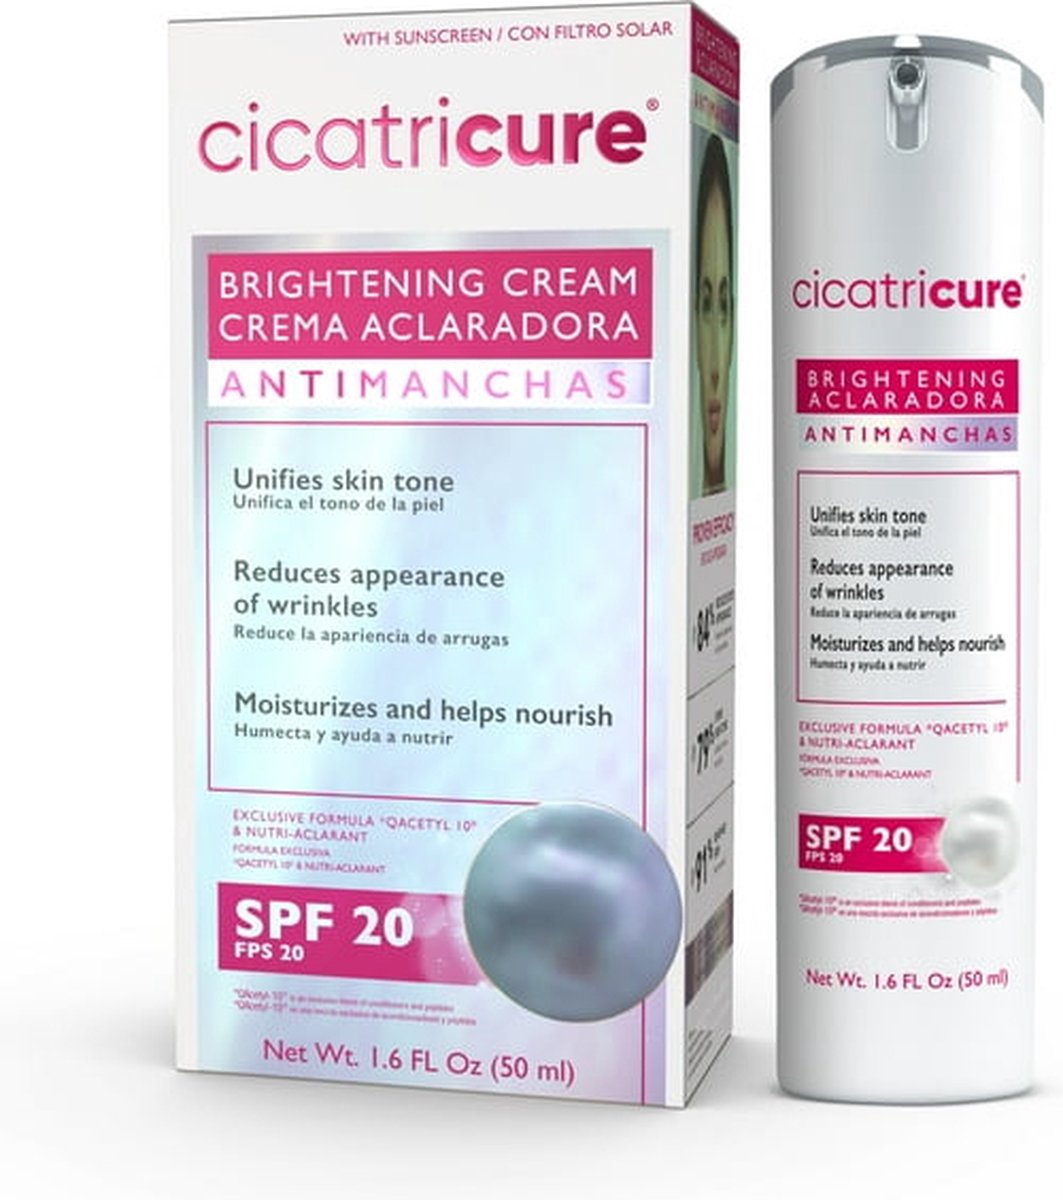 Cicatricure - Brightening Face Cream with Qacetyl and Nutri-Aclarant